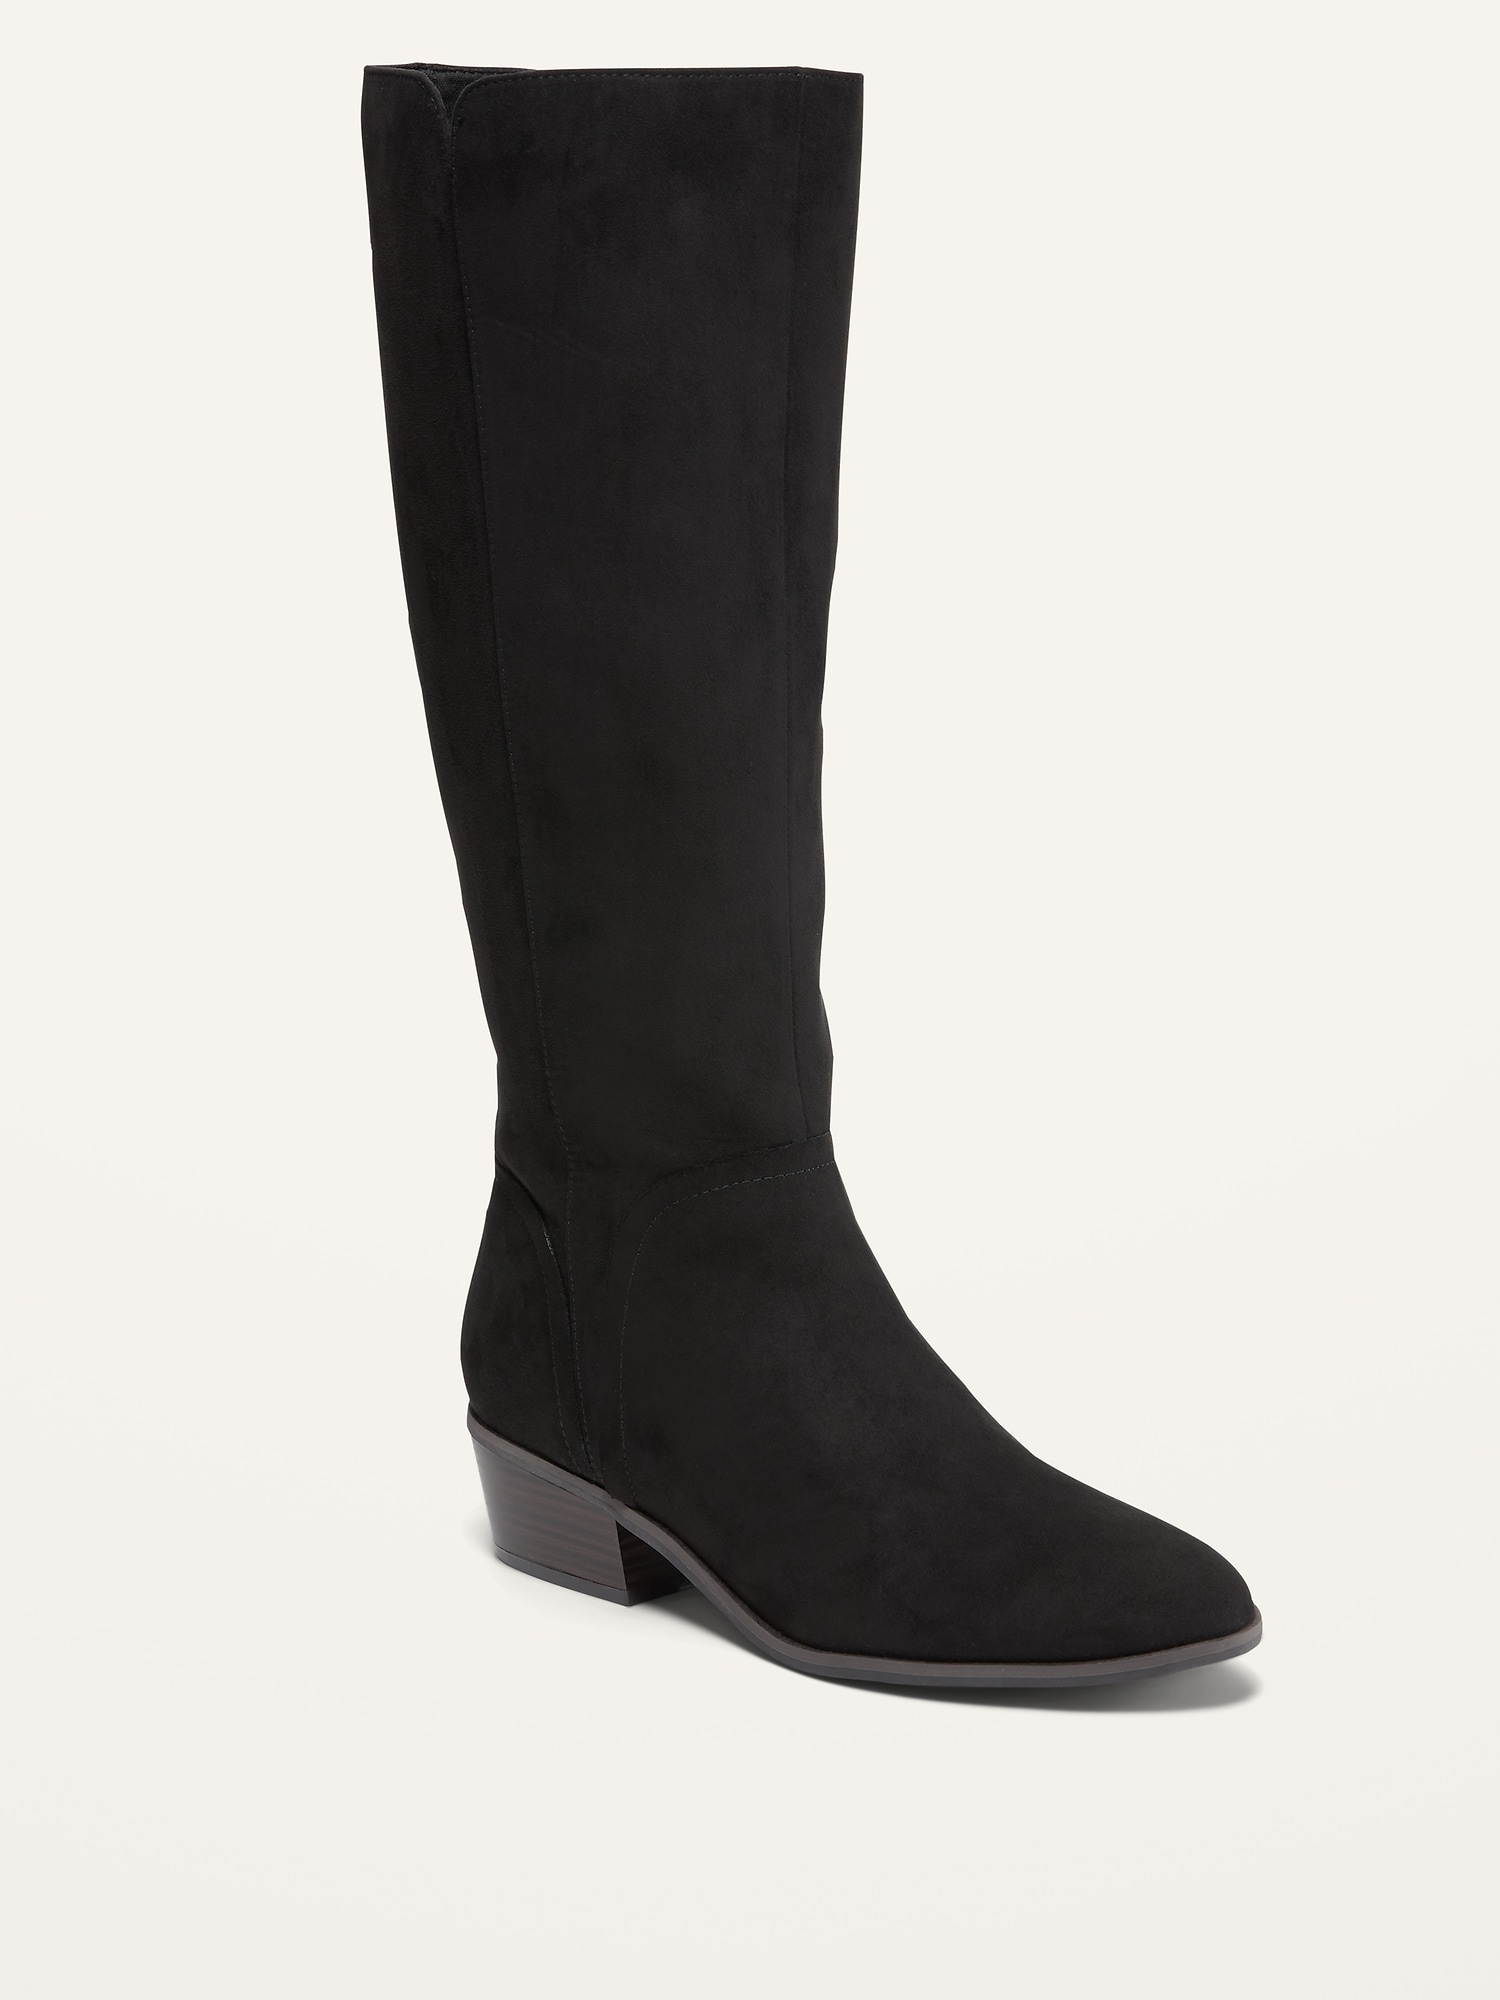 old navy knee high boots